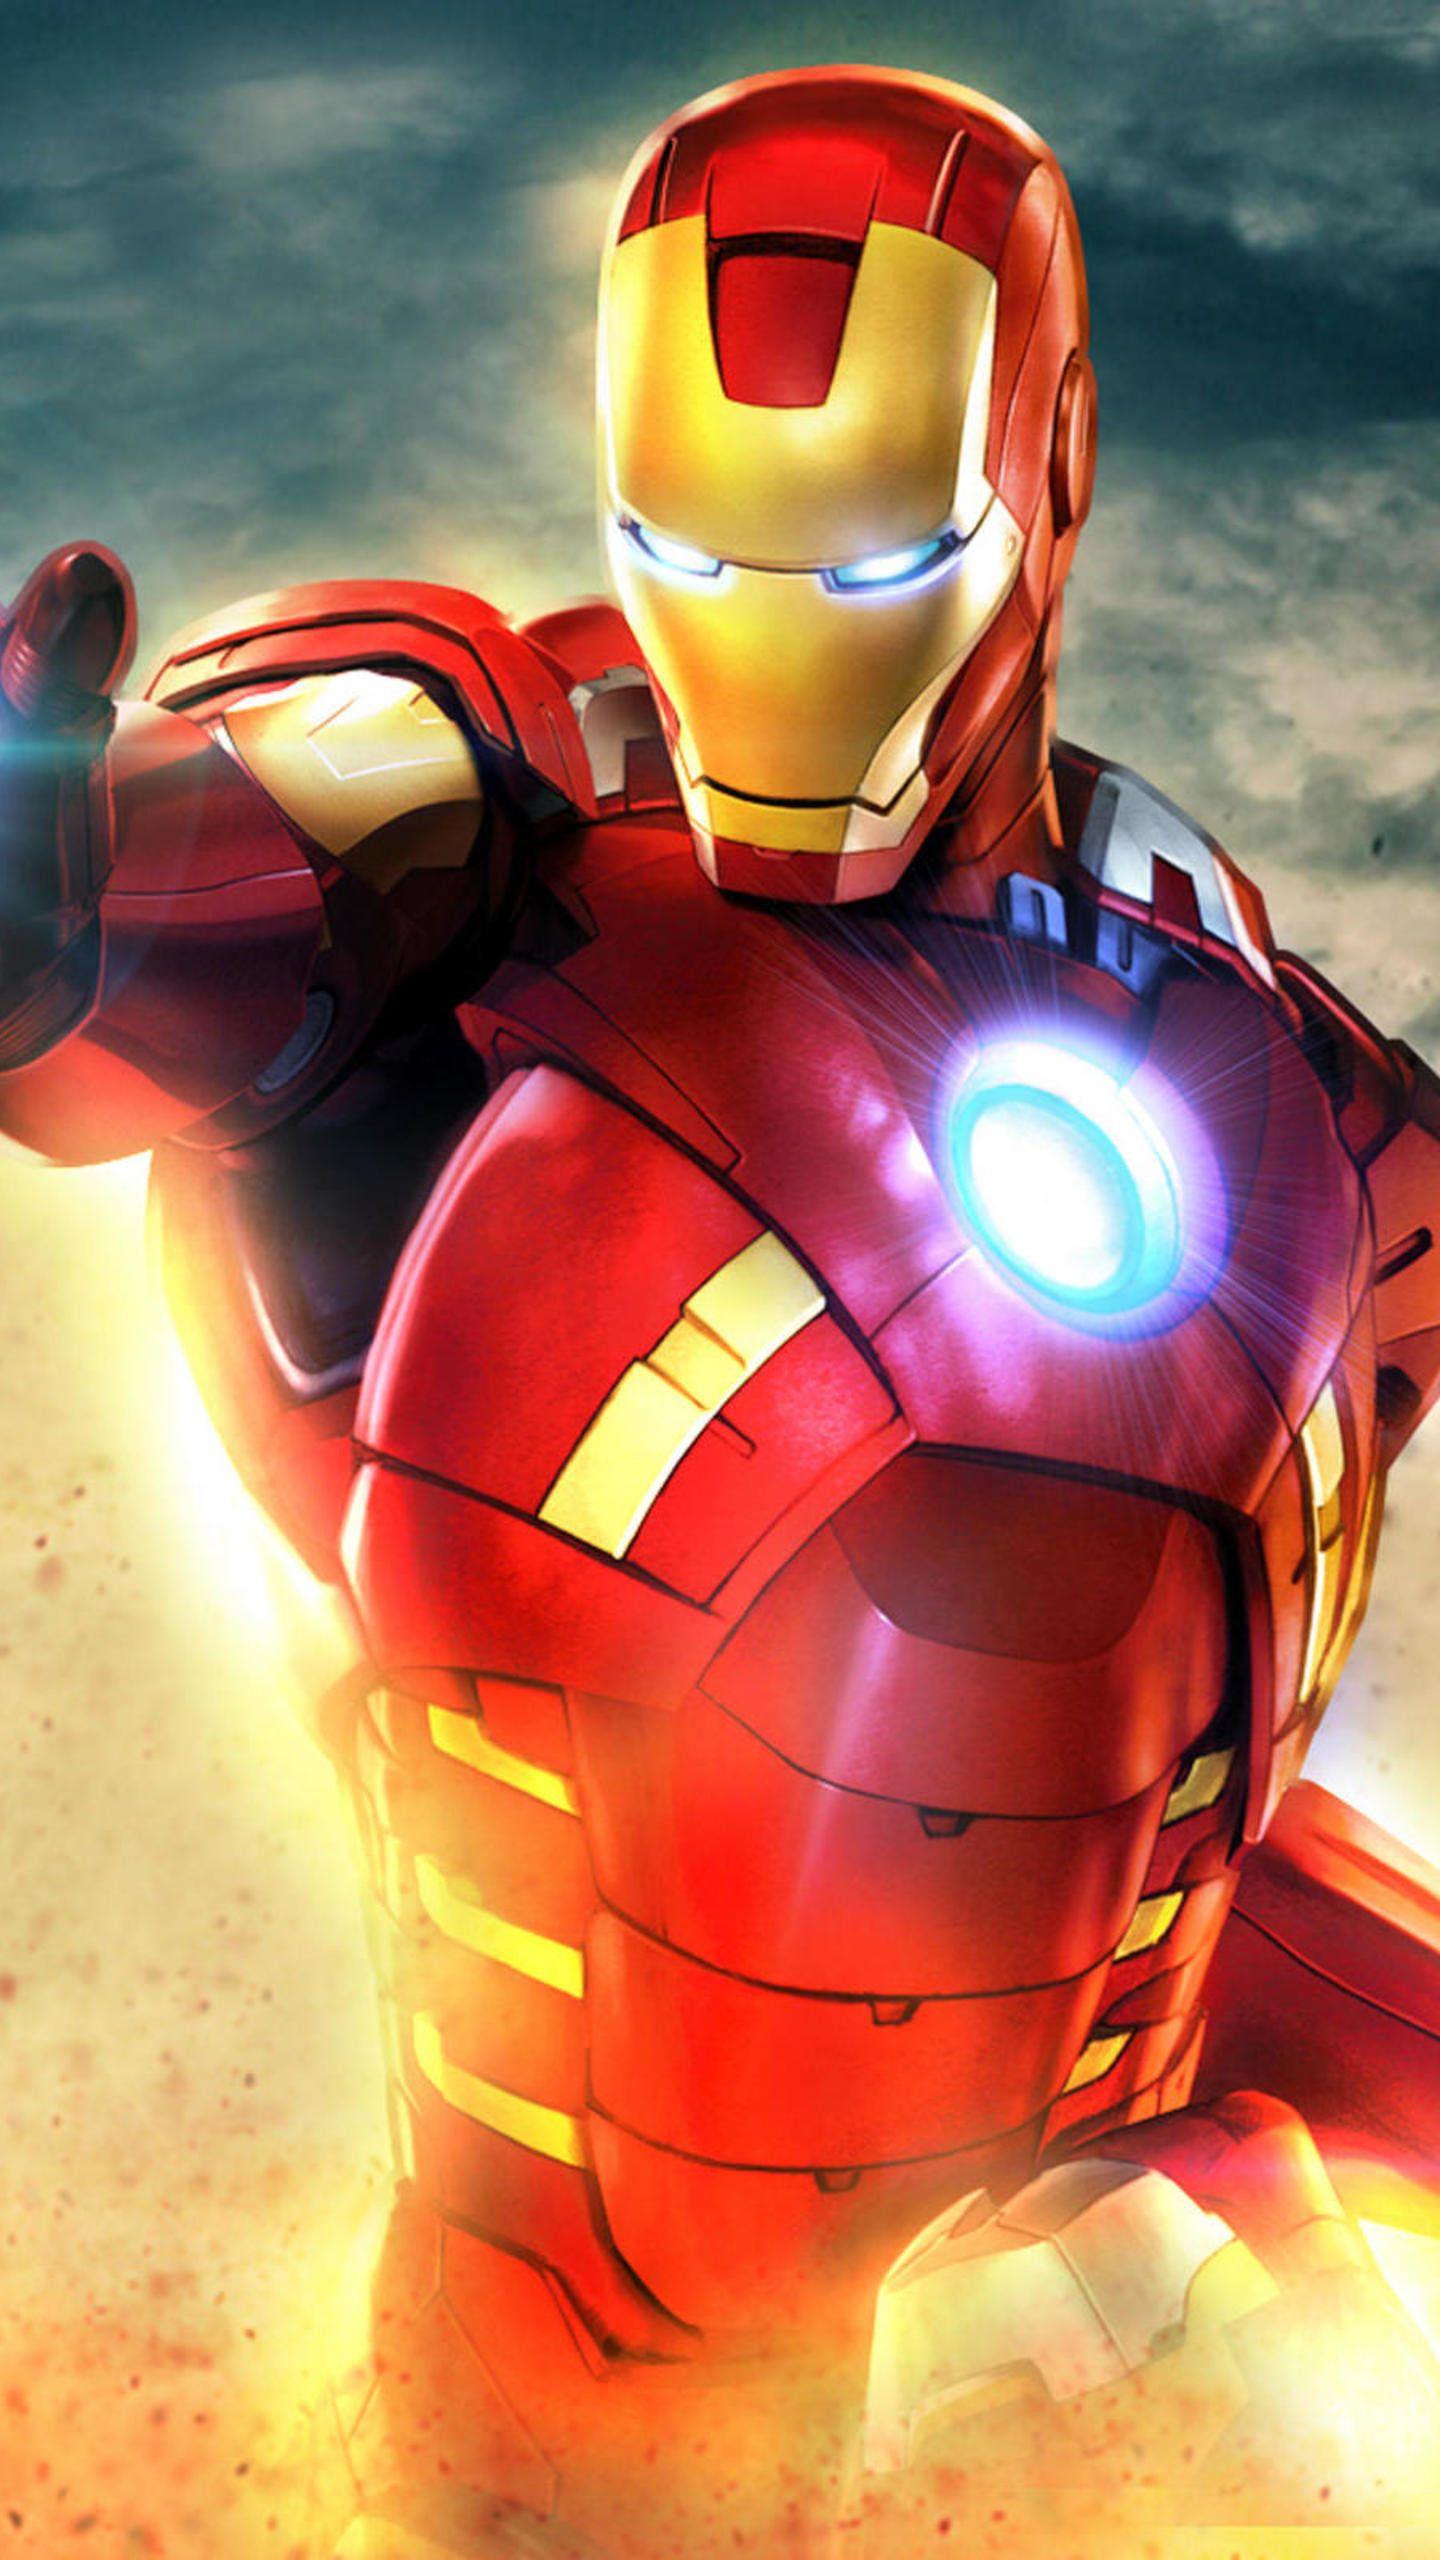 New Art Iron Man, HD Superheroes Wallpaper Photo and Picture